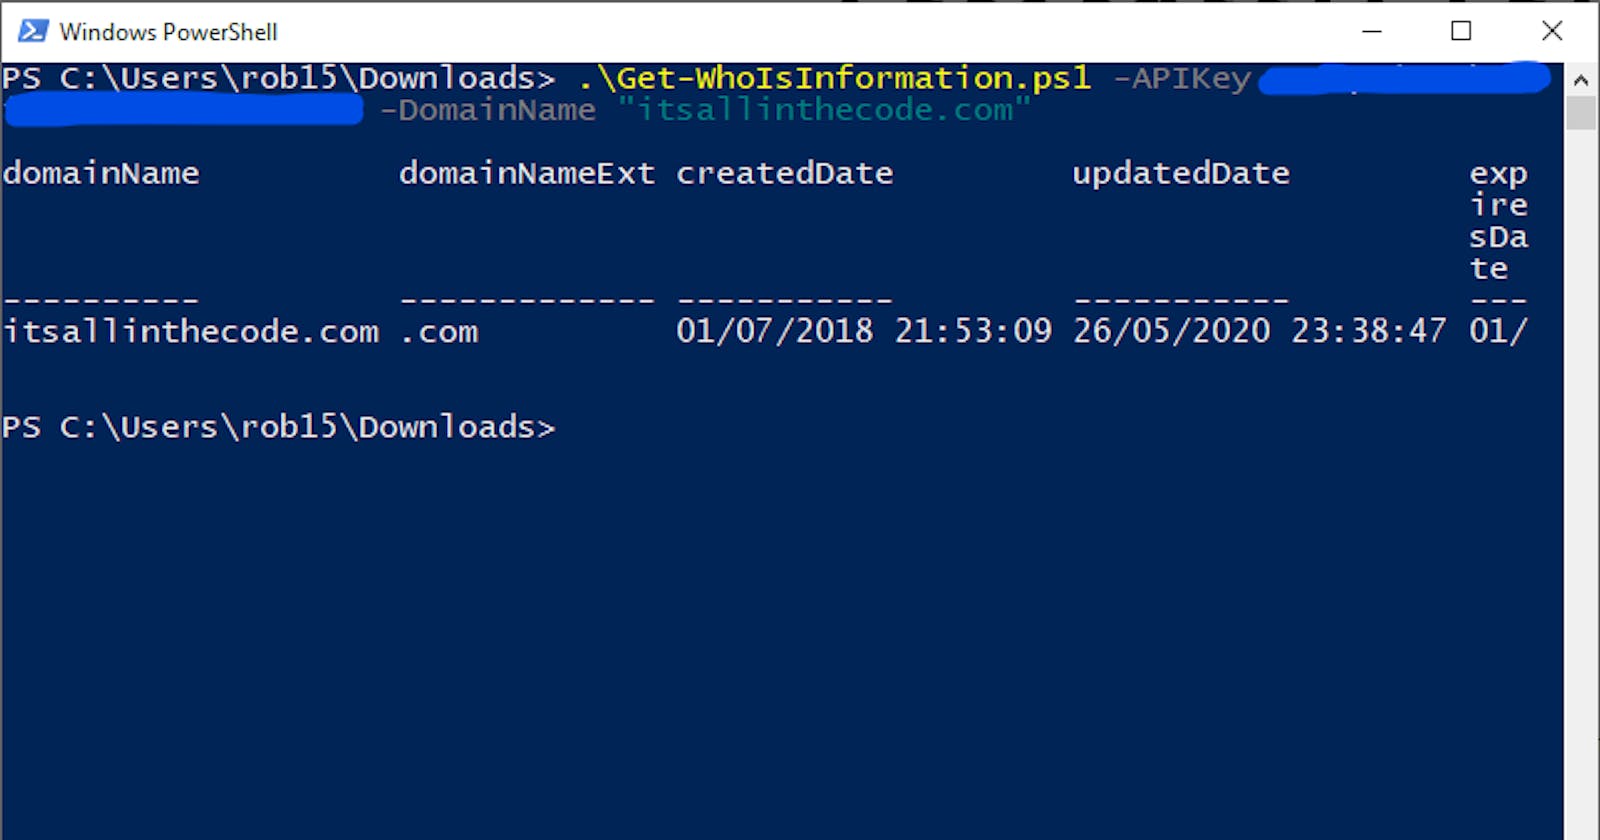 PowerShell - Get WHOIS domain information